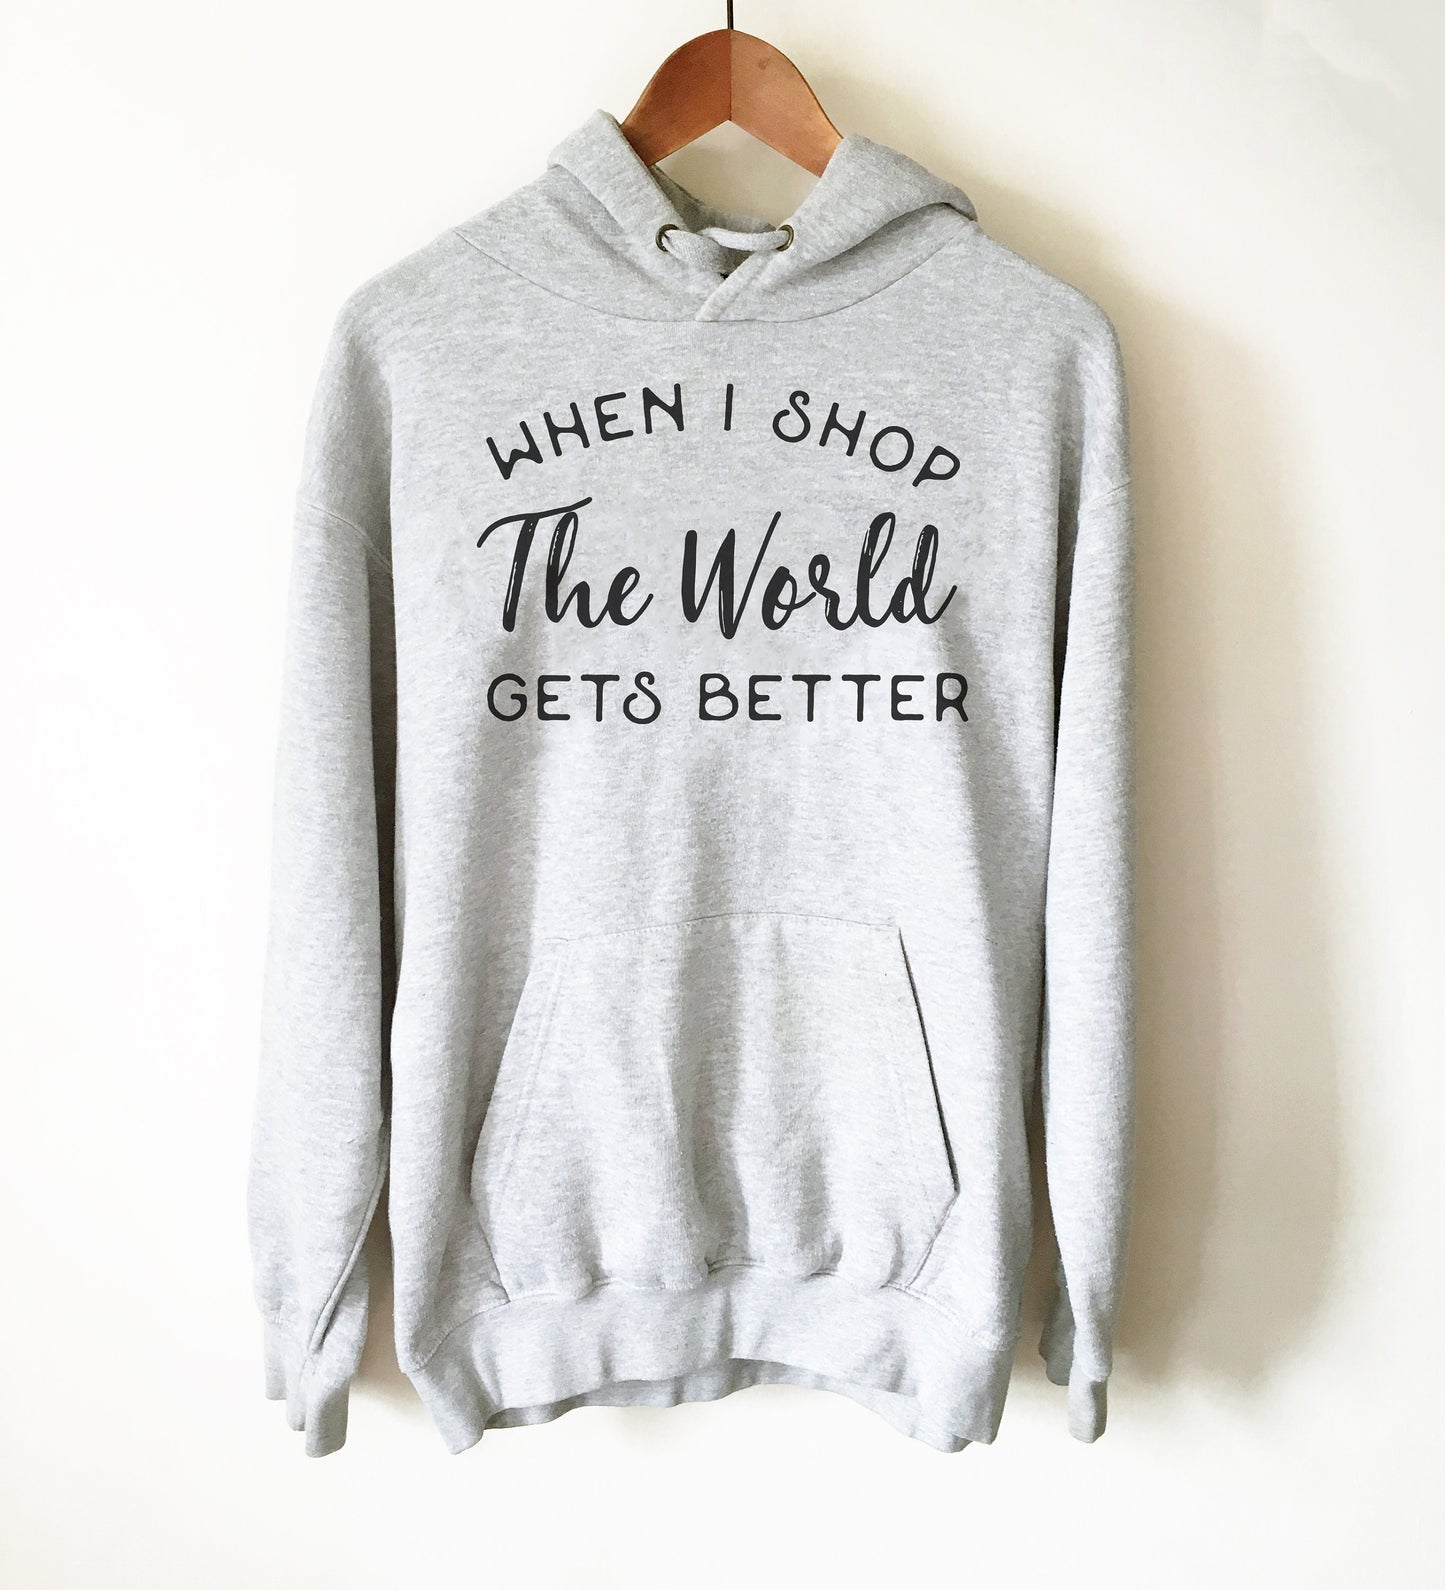 When I Shop The World Gets Better Hoodie - Shopping Shirt, Shopping Gift, Shopaholic Shirt, Shopaholic Gift, Black Friday Shirt